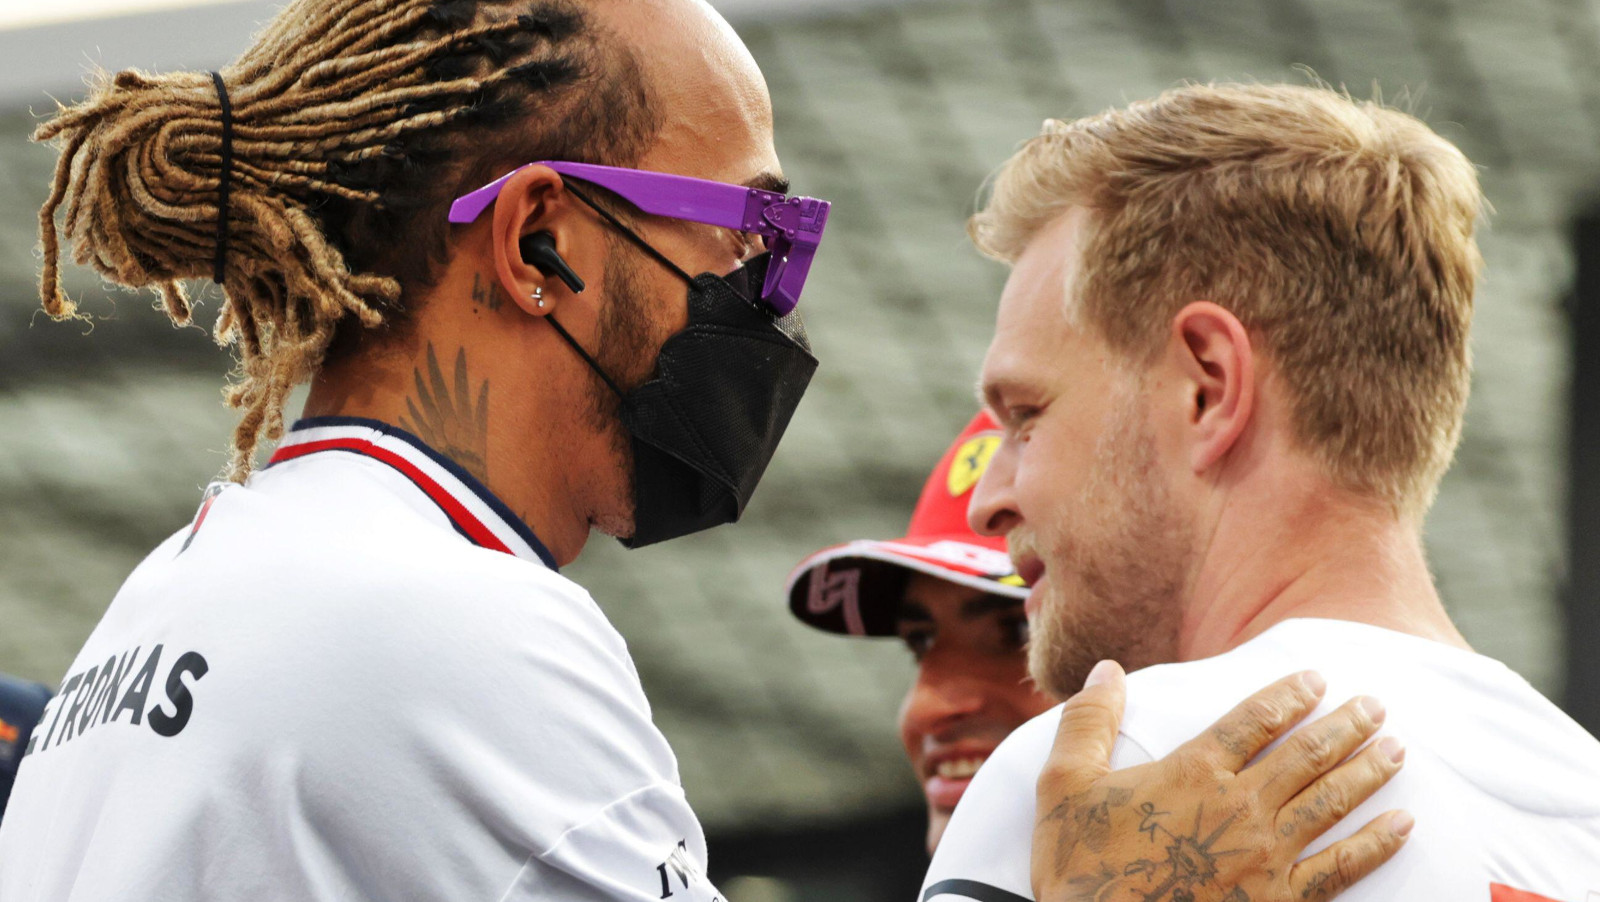 Lewis Hamilton pats Kevin Magnussen on the back. Jeddah March 2022